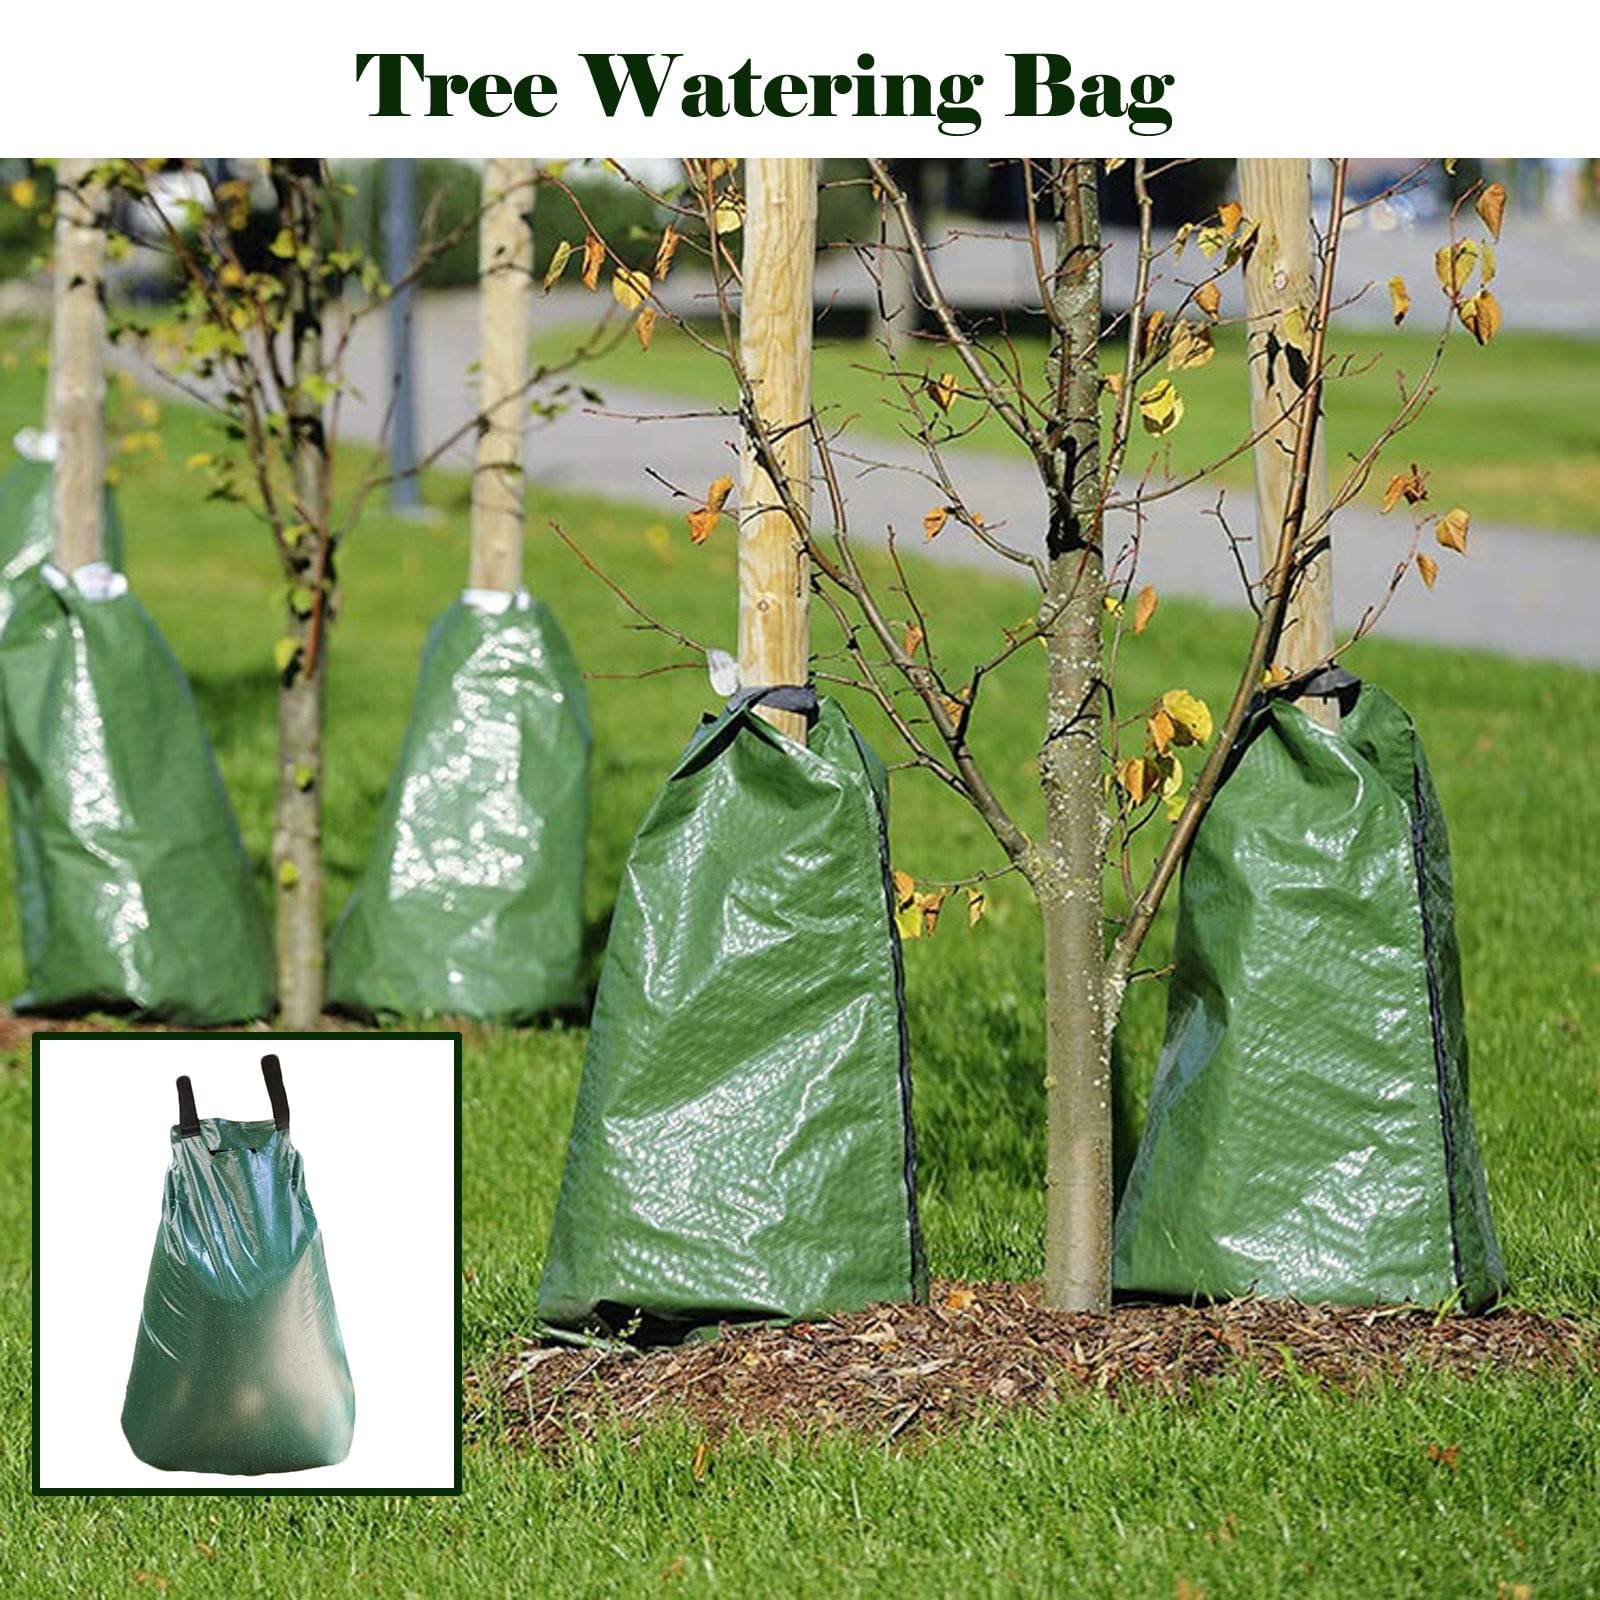 20 Gallon Slow Release Watering Bag for Trees 4 Pack 5-8 Hours Releasing Time Yaegoo Tree Watering Bag Tree Irrigation Bag Made of Durable PVC Material with Zipper